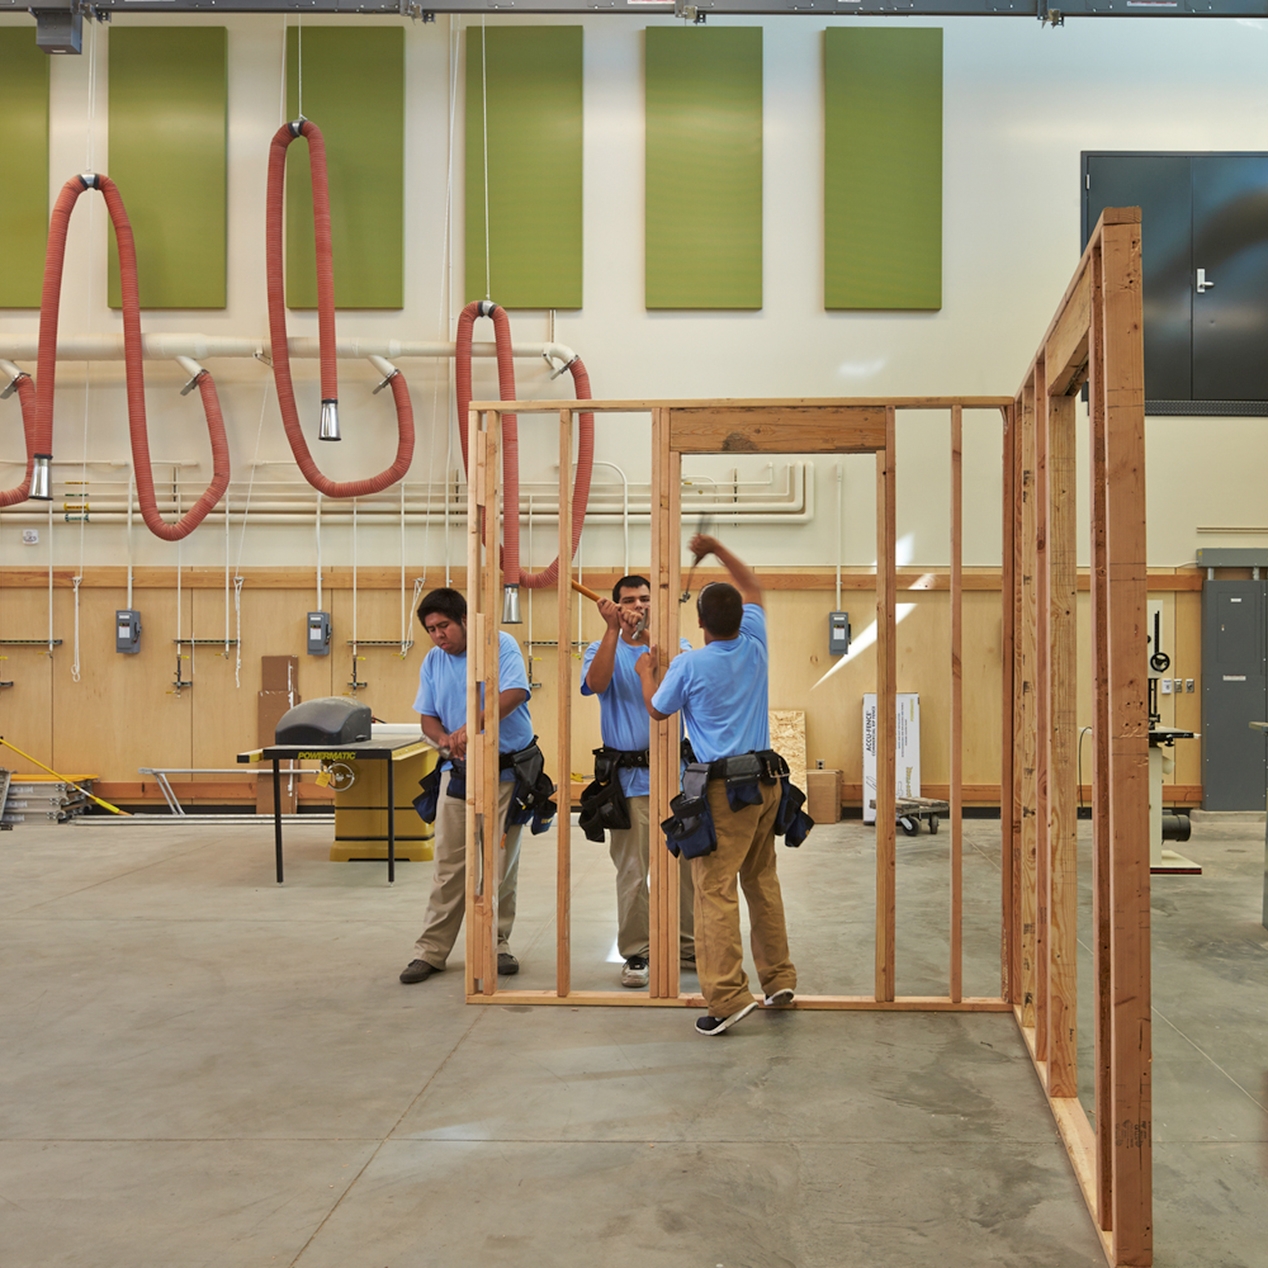 The Columbia Basin Skills Center features customized spaces for career exploration that are intentionally designed for development of a specific set of skills, such as culinary or construction technology. – NAC